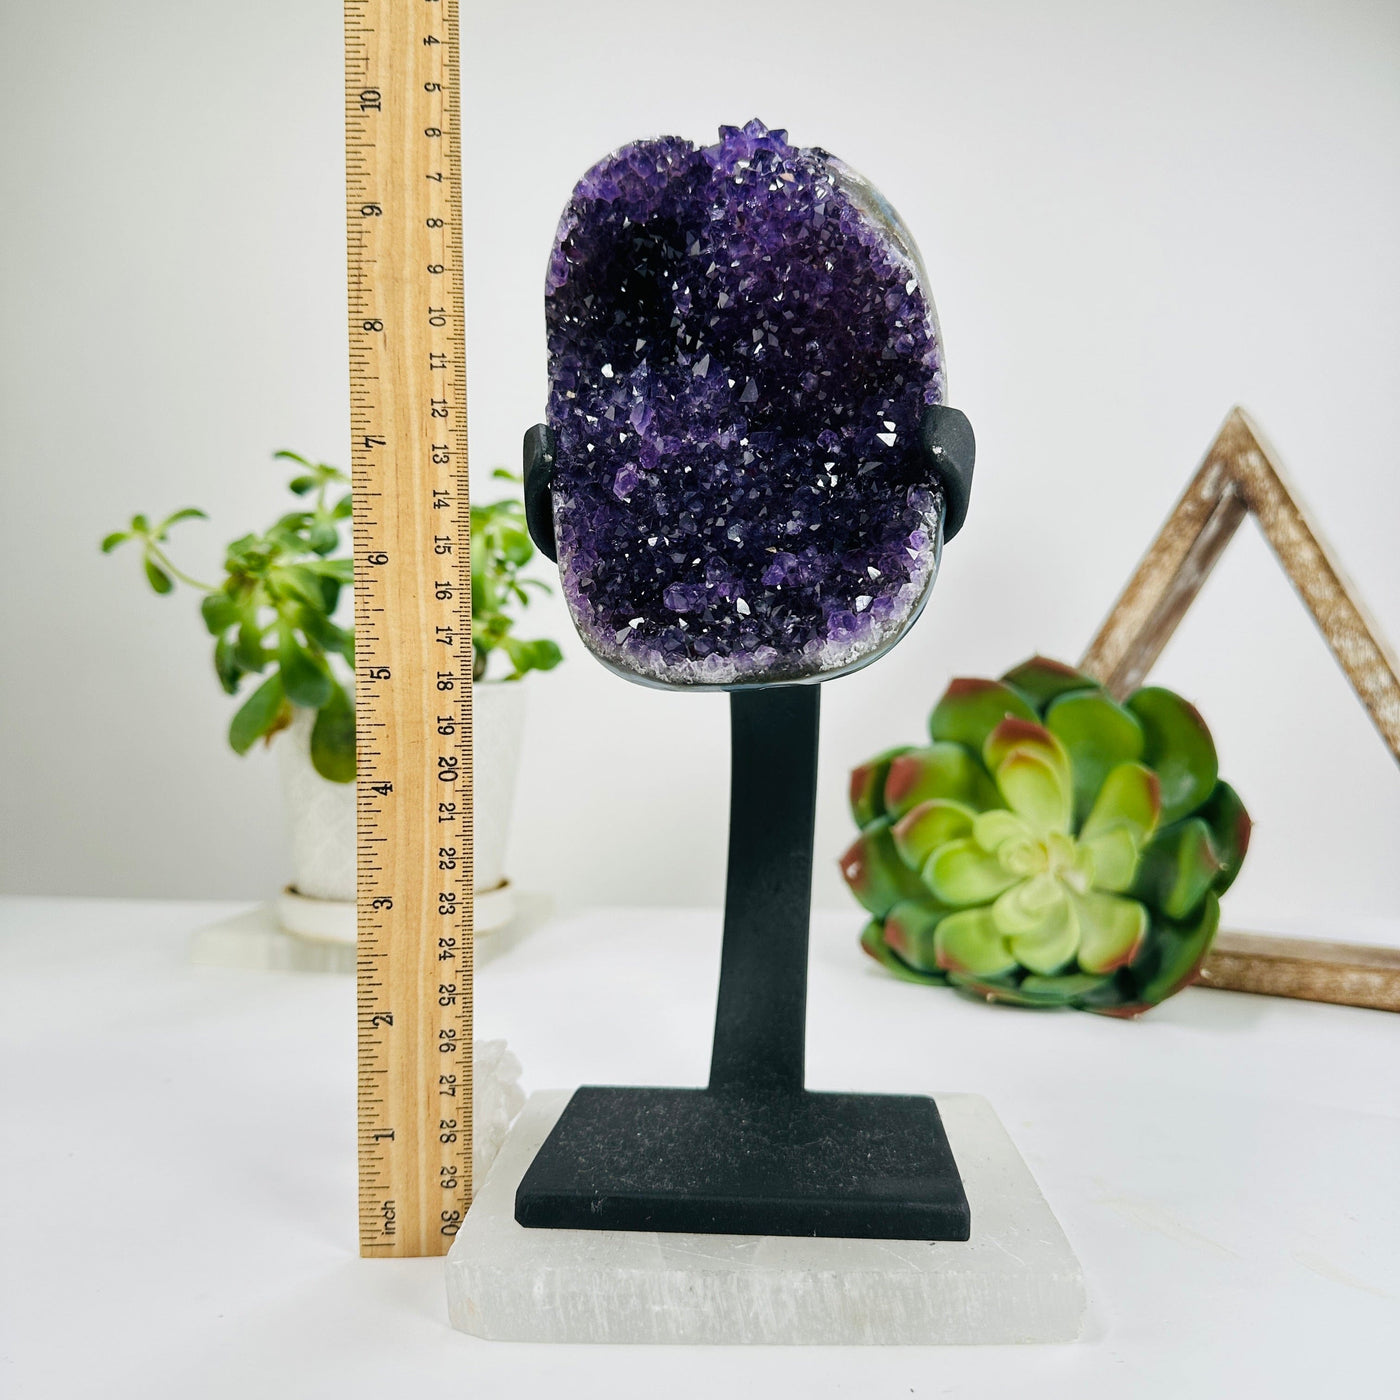 purple amethyst on metal stand next to a ruler for size reference